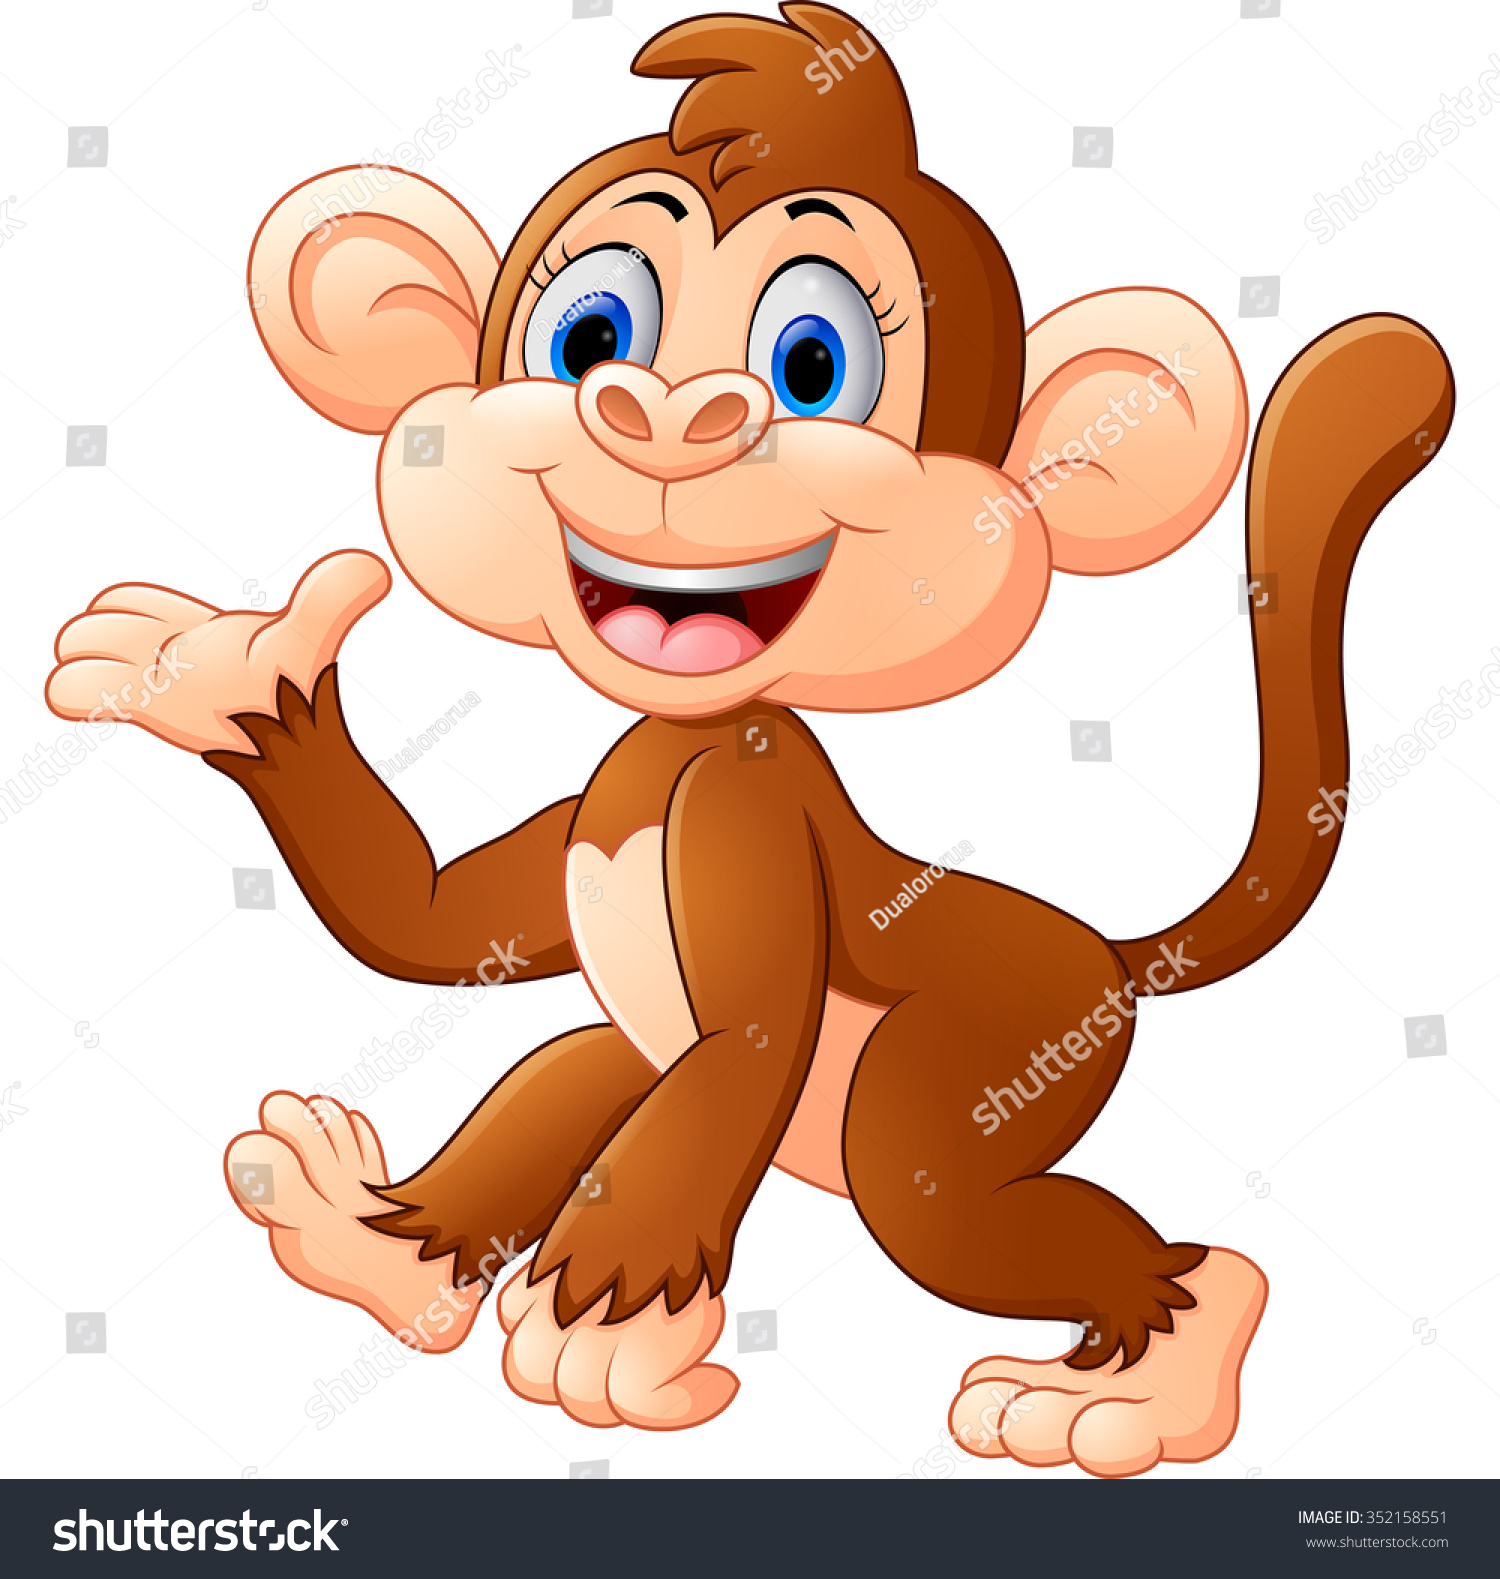 monkey laughing clipart - photo #17